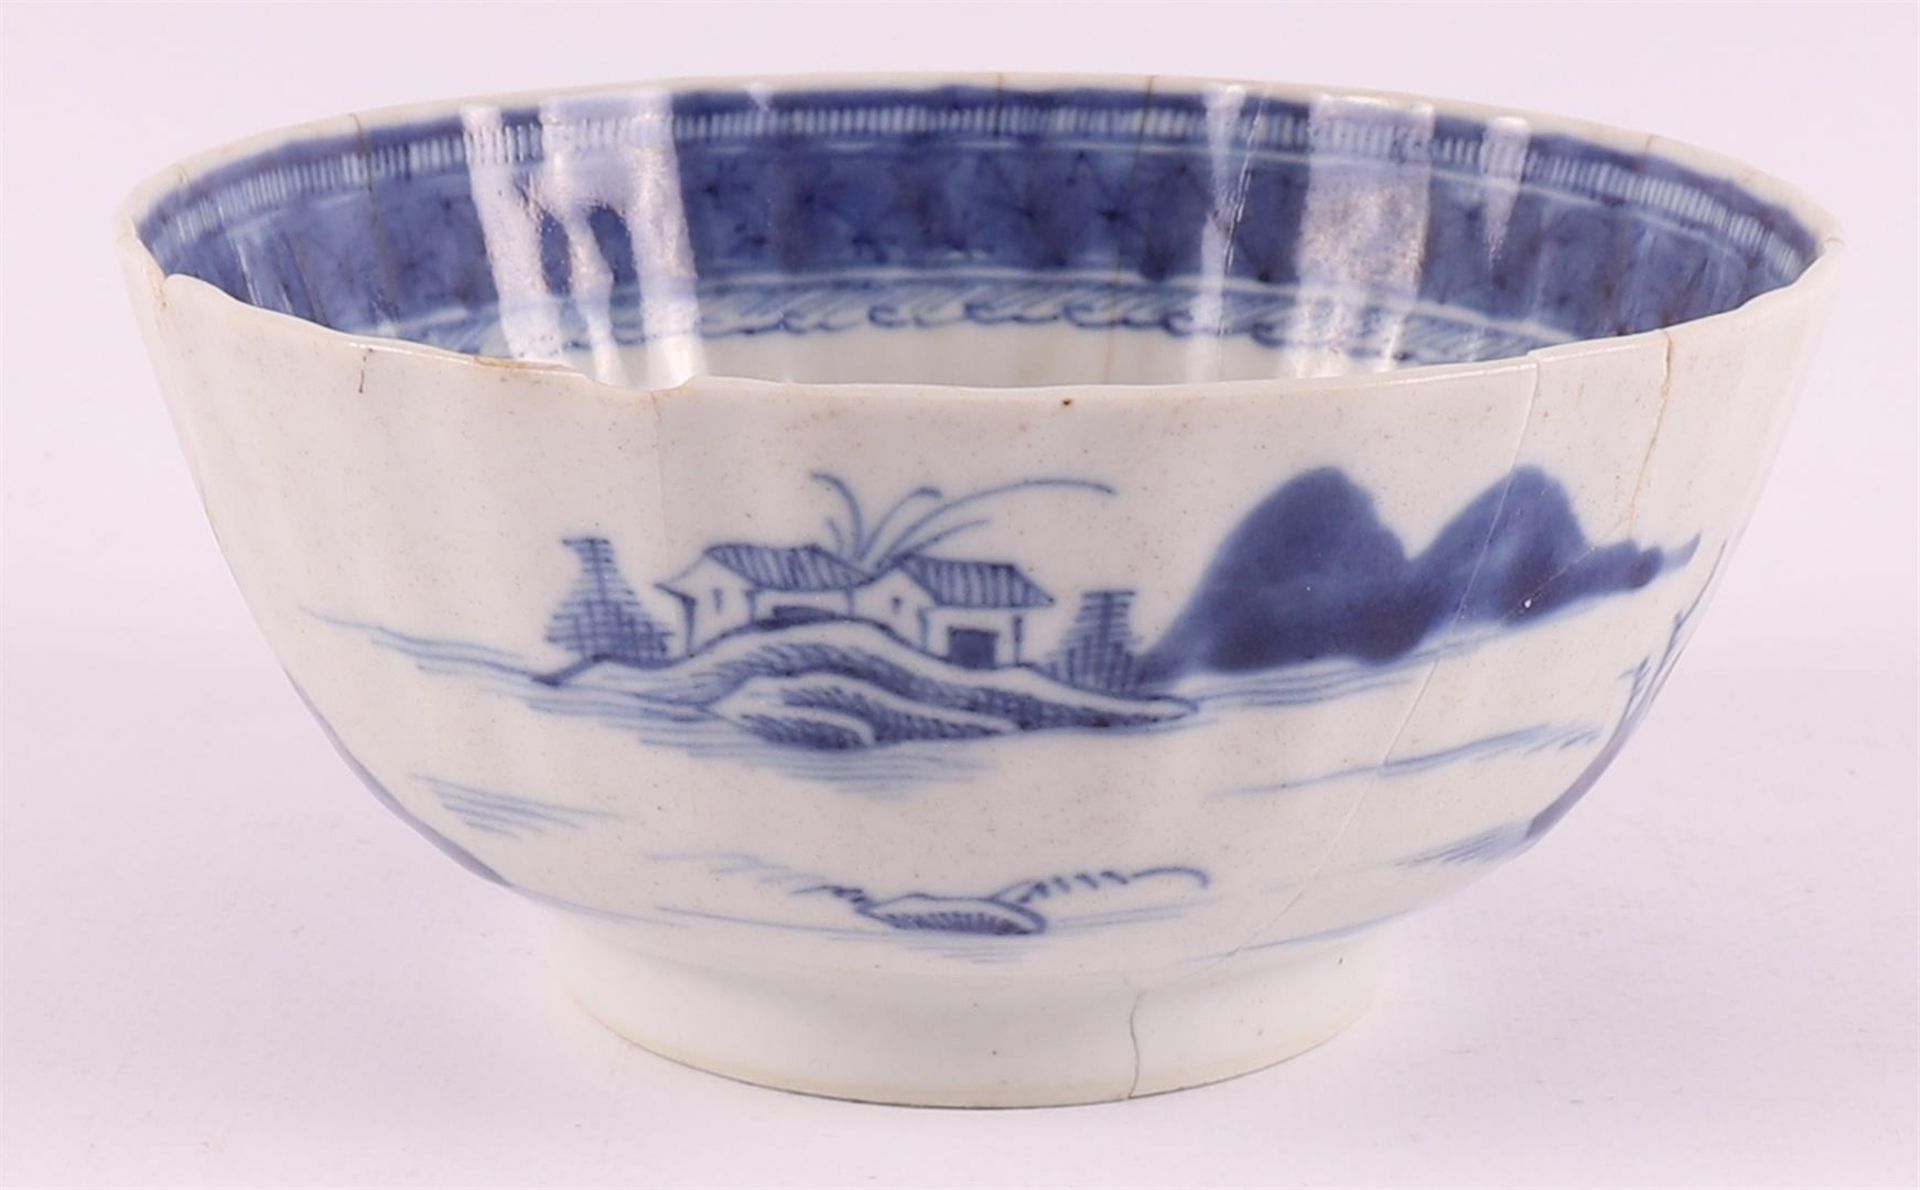 A lot of various Chinese porcelain bowls, China, 18th century - Image 18 of 25